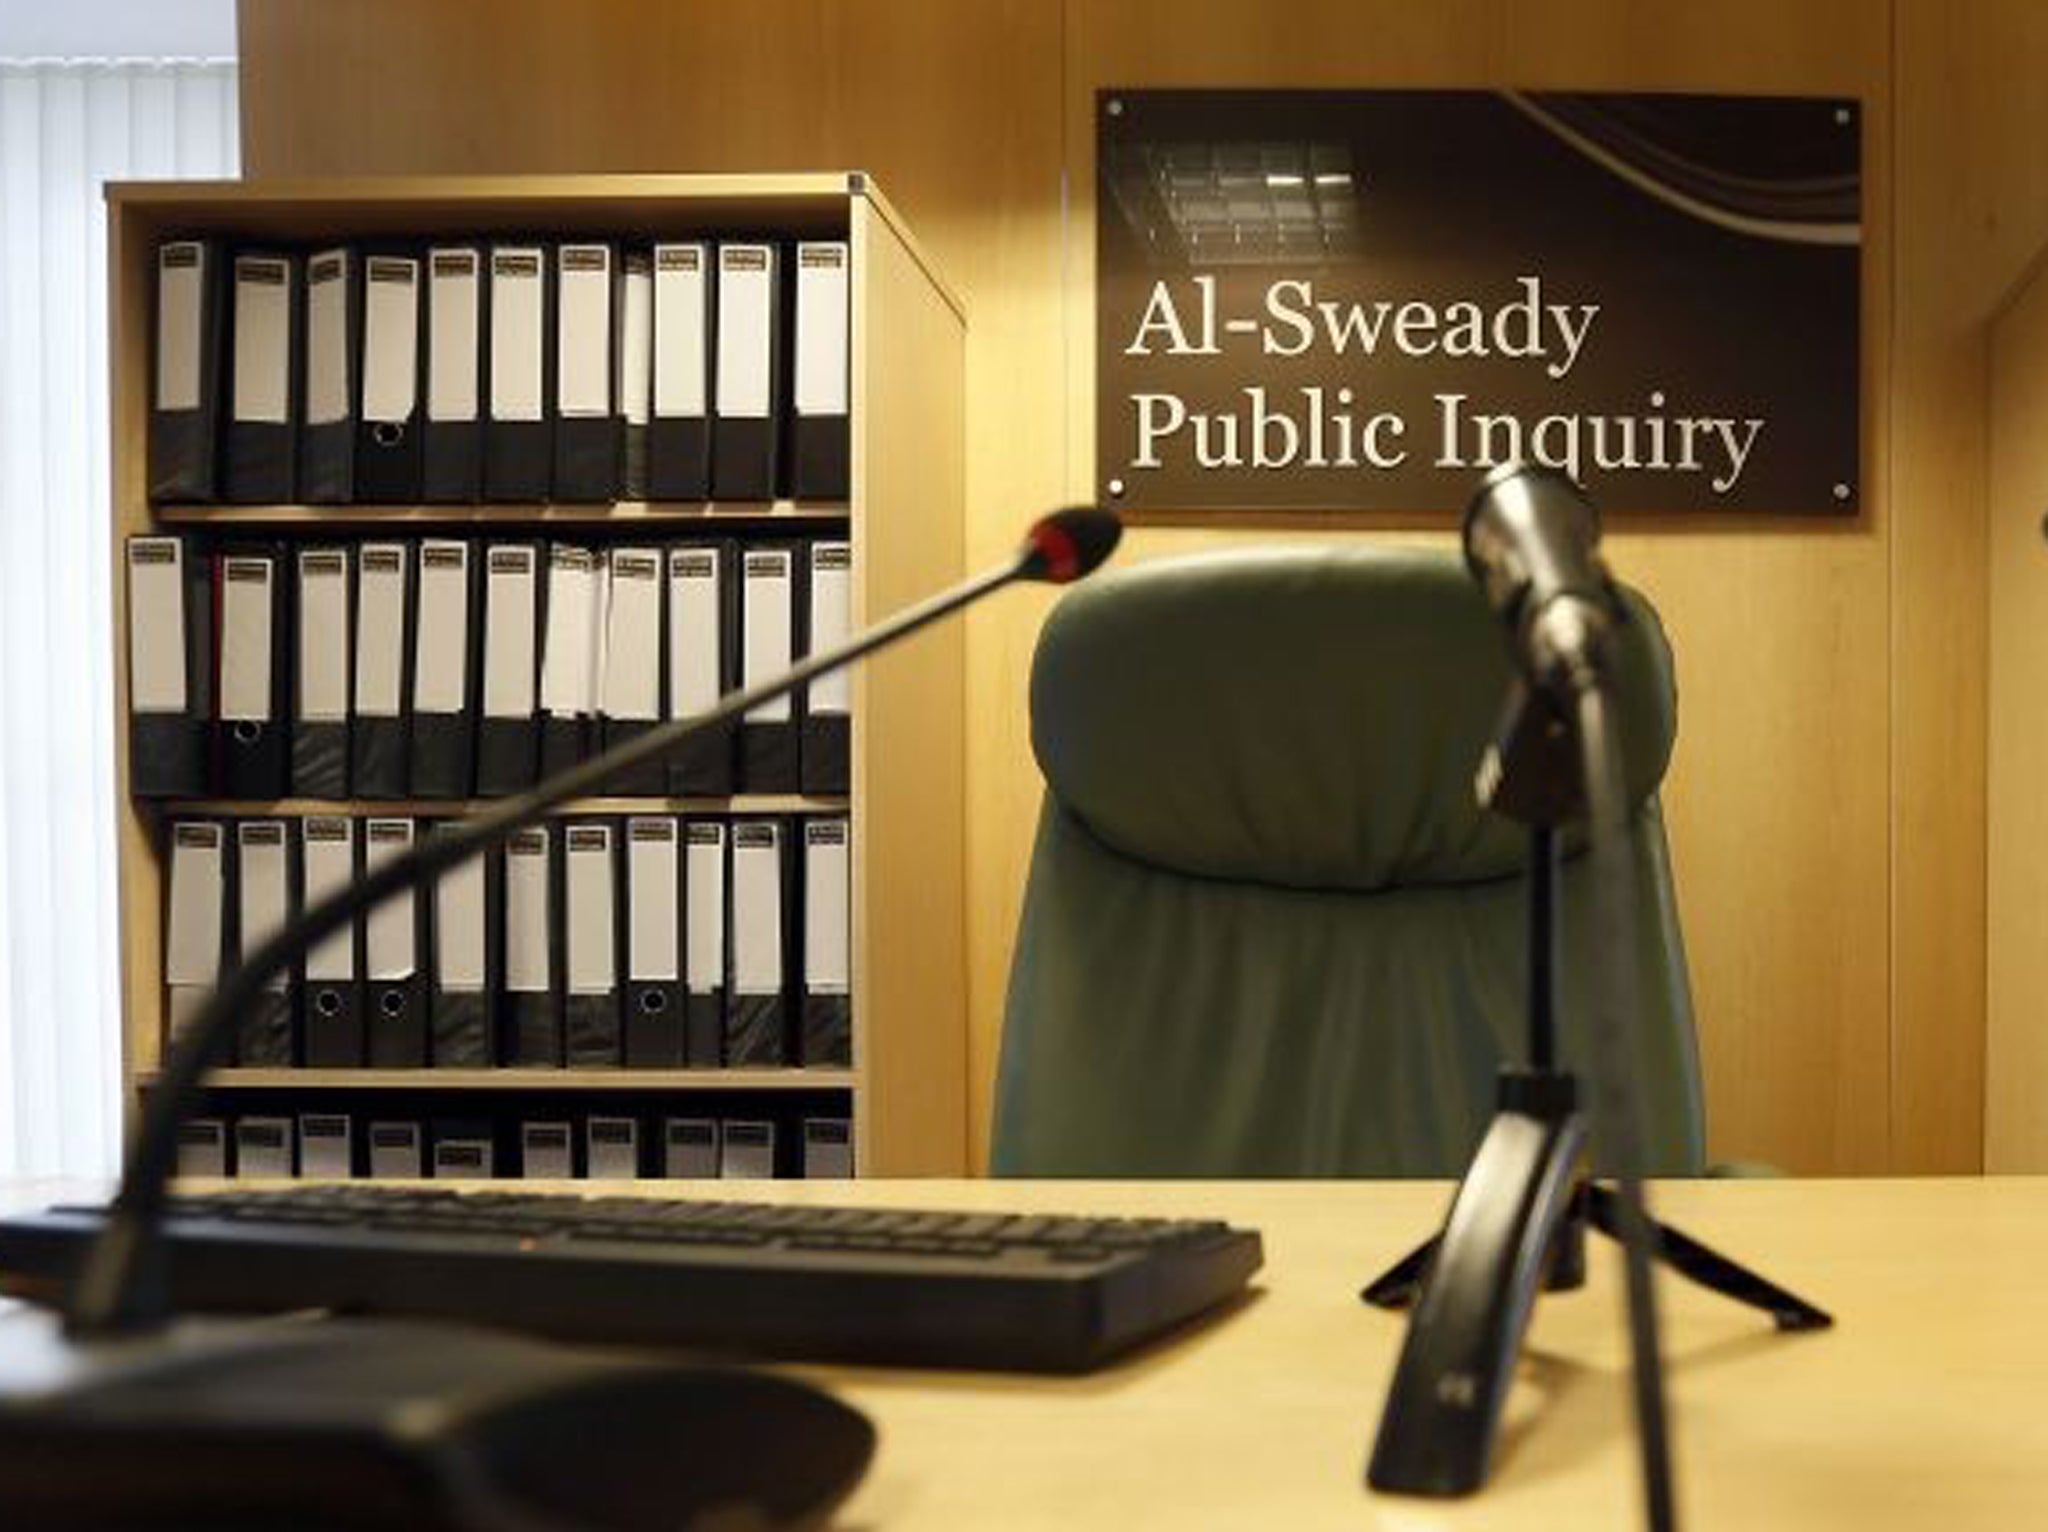 The venue of the Al-Sweady Inquiry is seen on the first day of the inquiry, in central London on 4 March 2013.